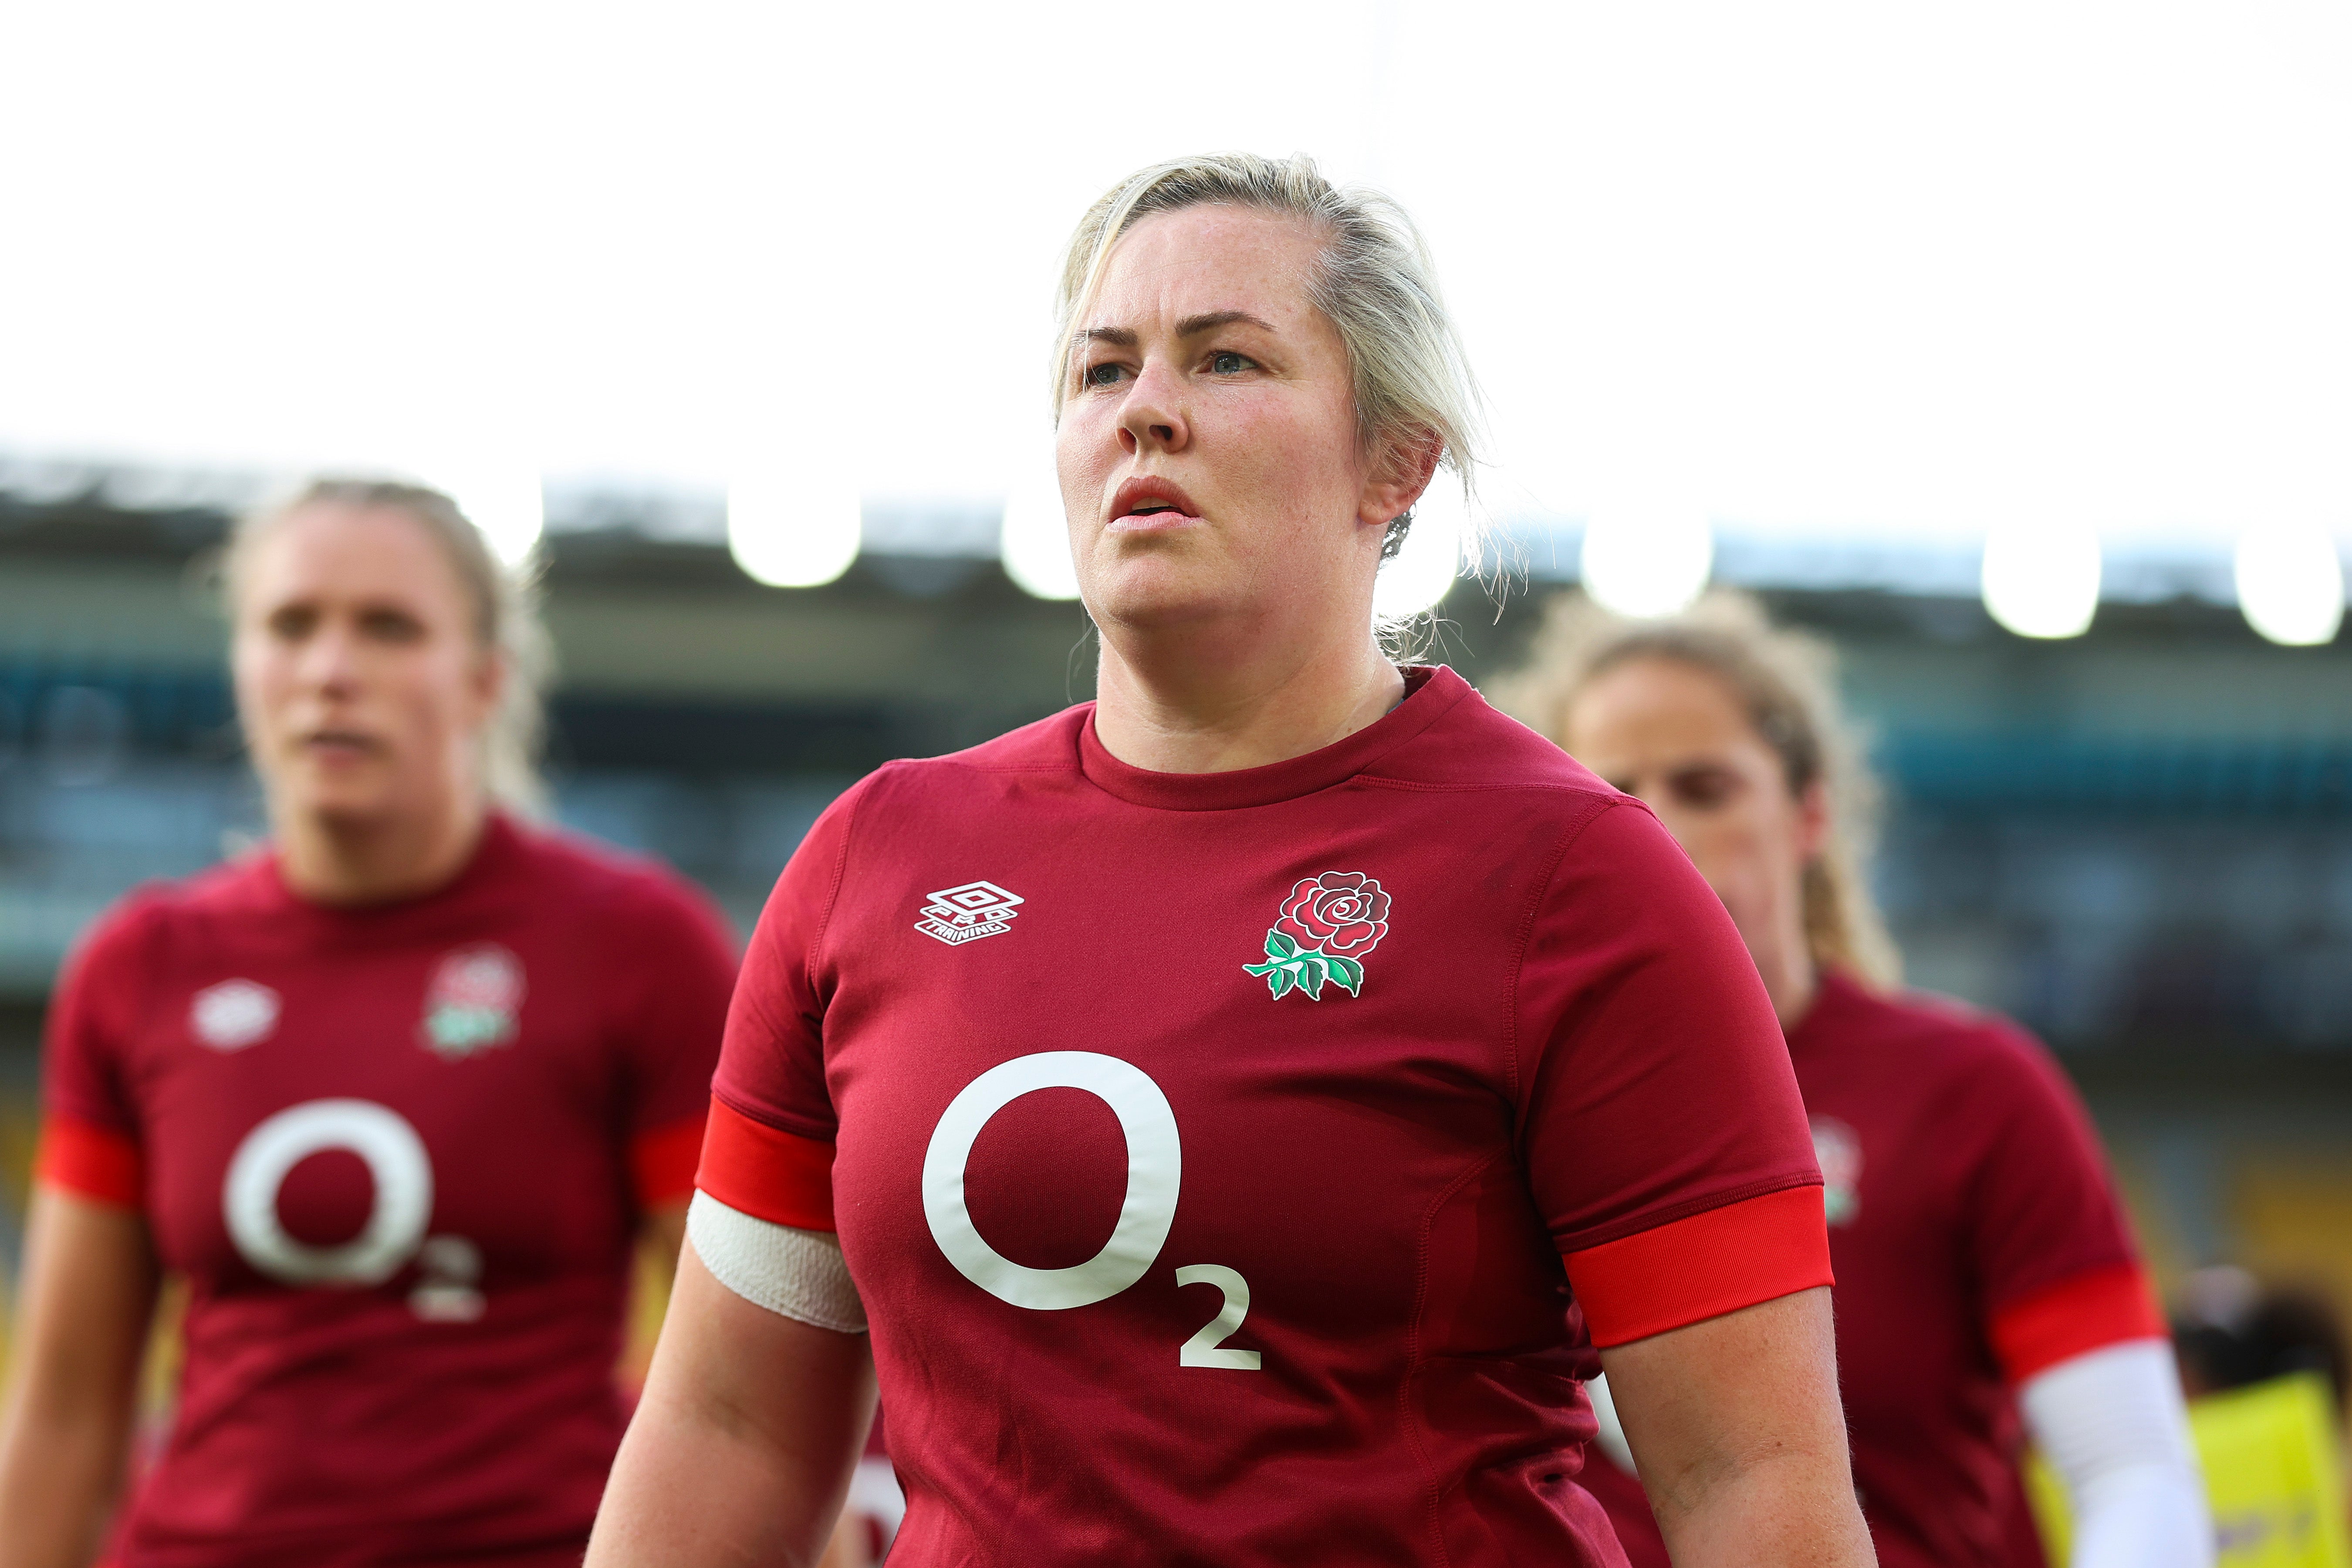 England captain Marlie Packer is one of the World Rugby Women’s Player of the Year